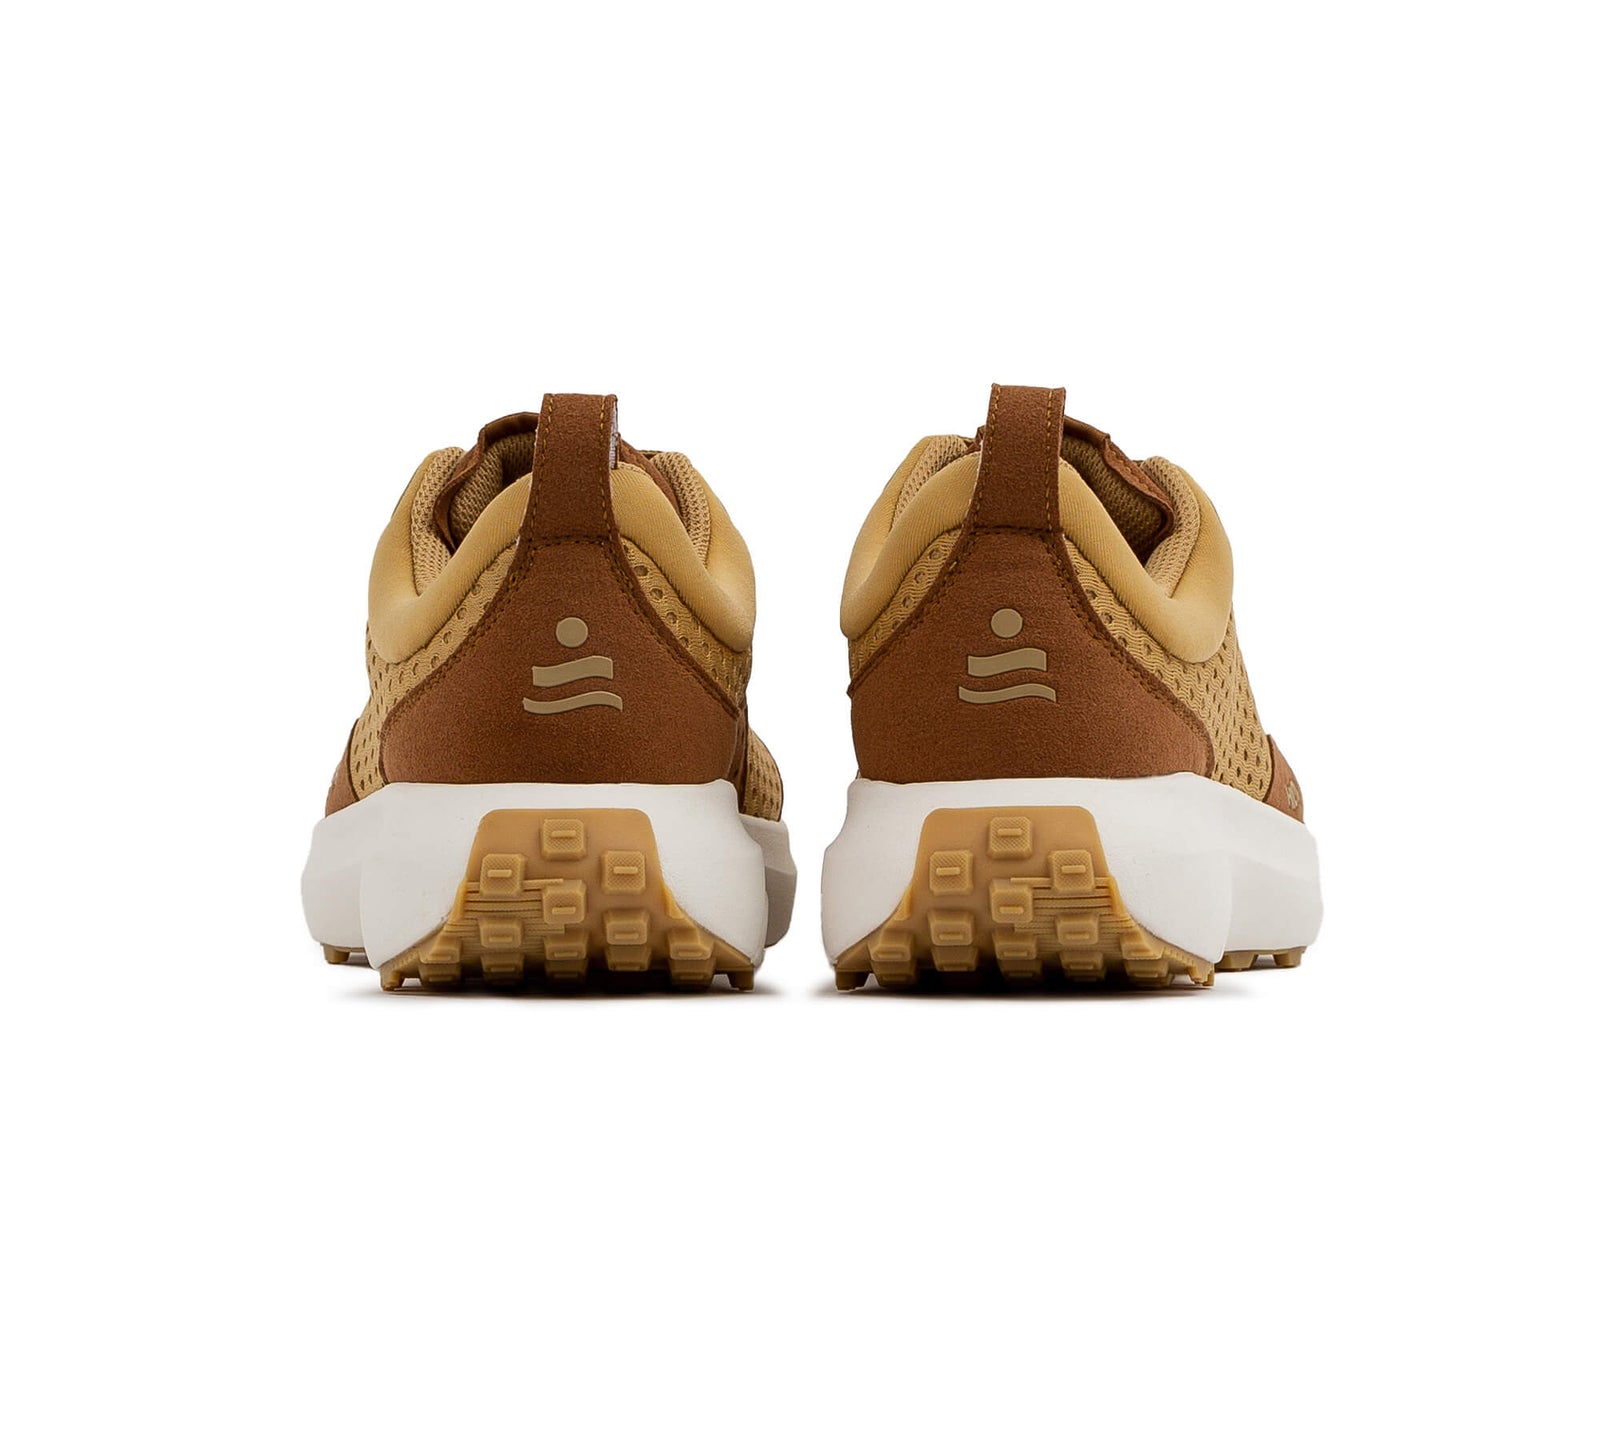 Back view of a pair of the Everywhere Hilma Running shoe in Sandstone